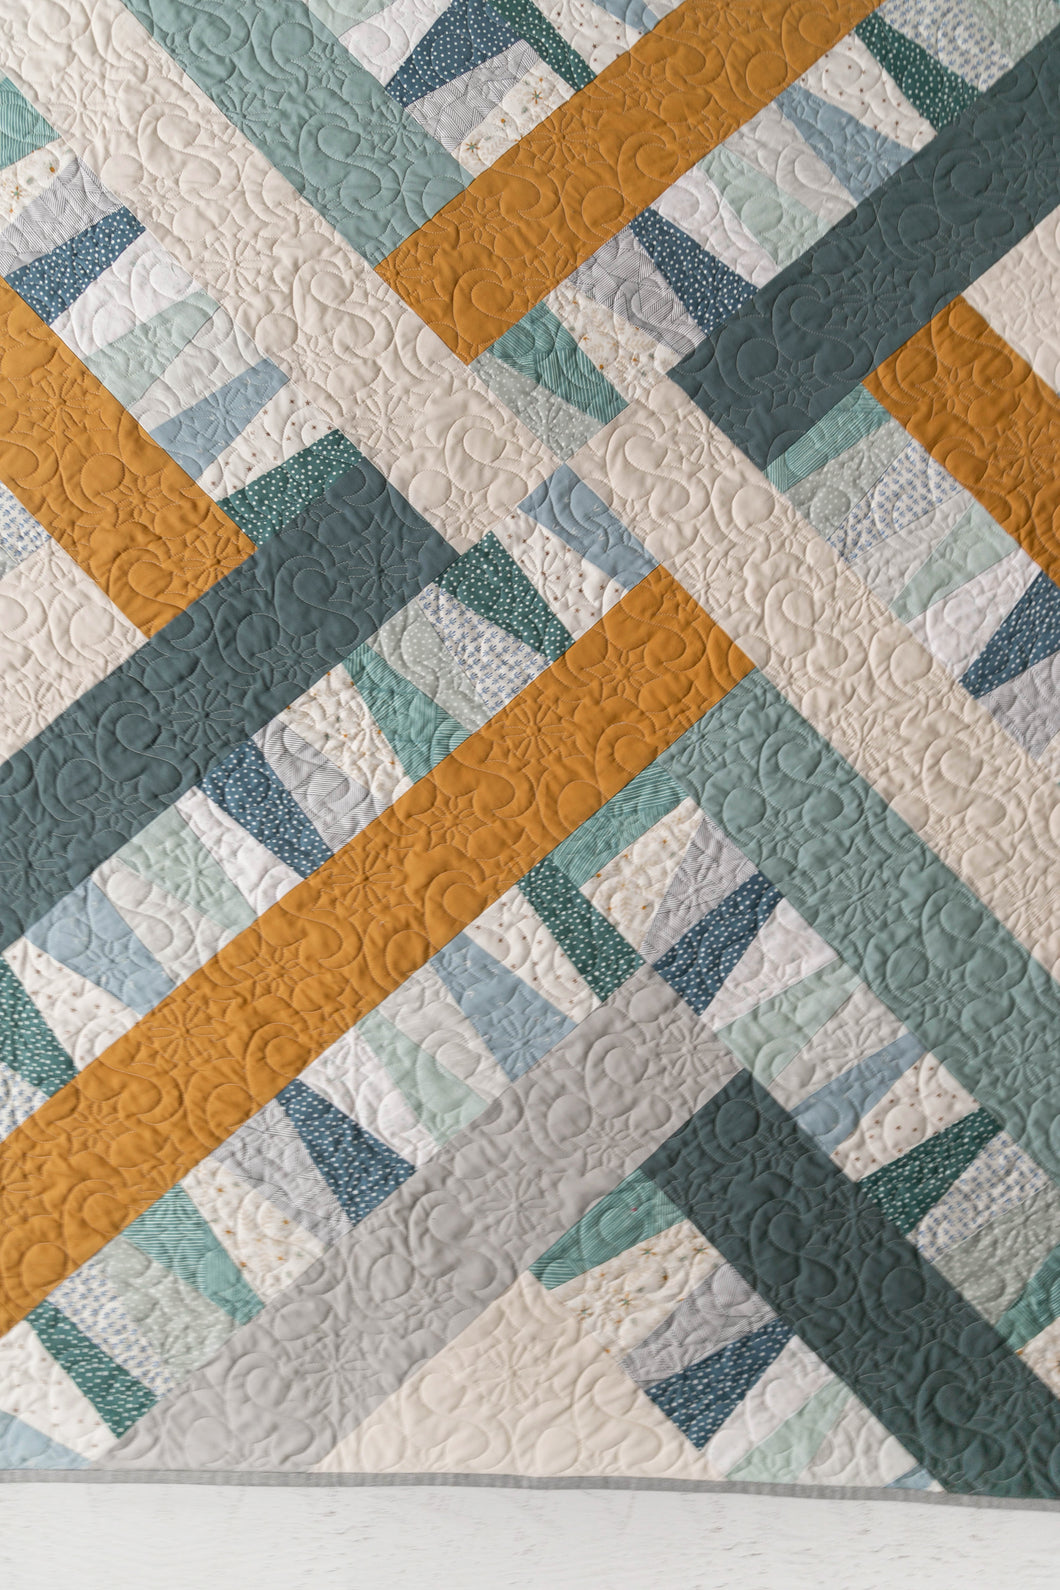 Garland quilt pattern by Suzy Quilts in Winter Walk colorway of light blue, teal and gold.  Quilt kits available at globalfibershop.com.